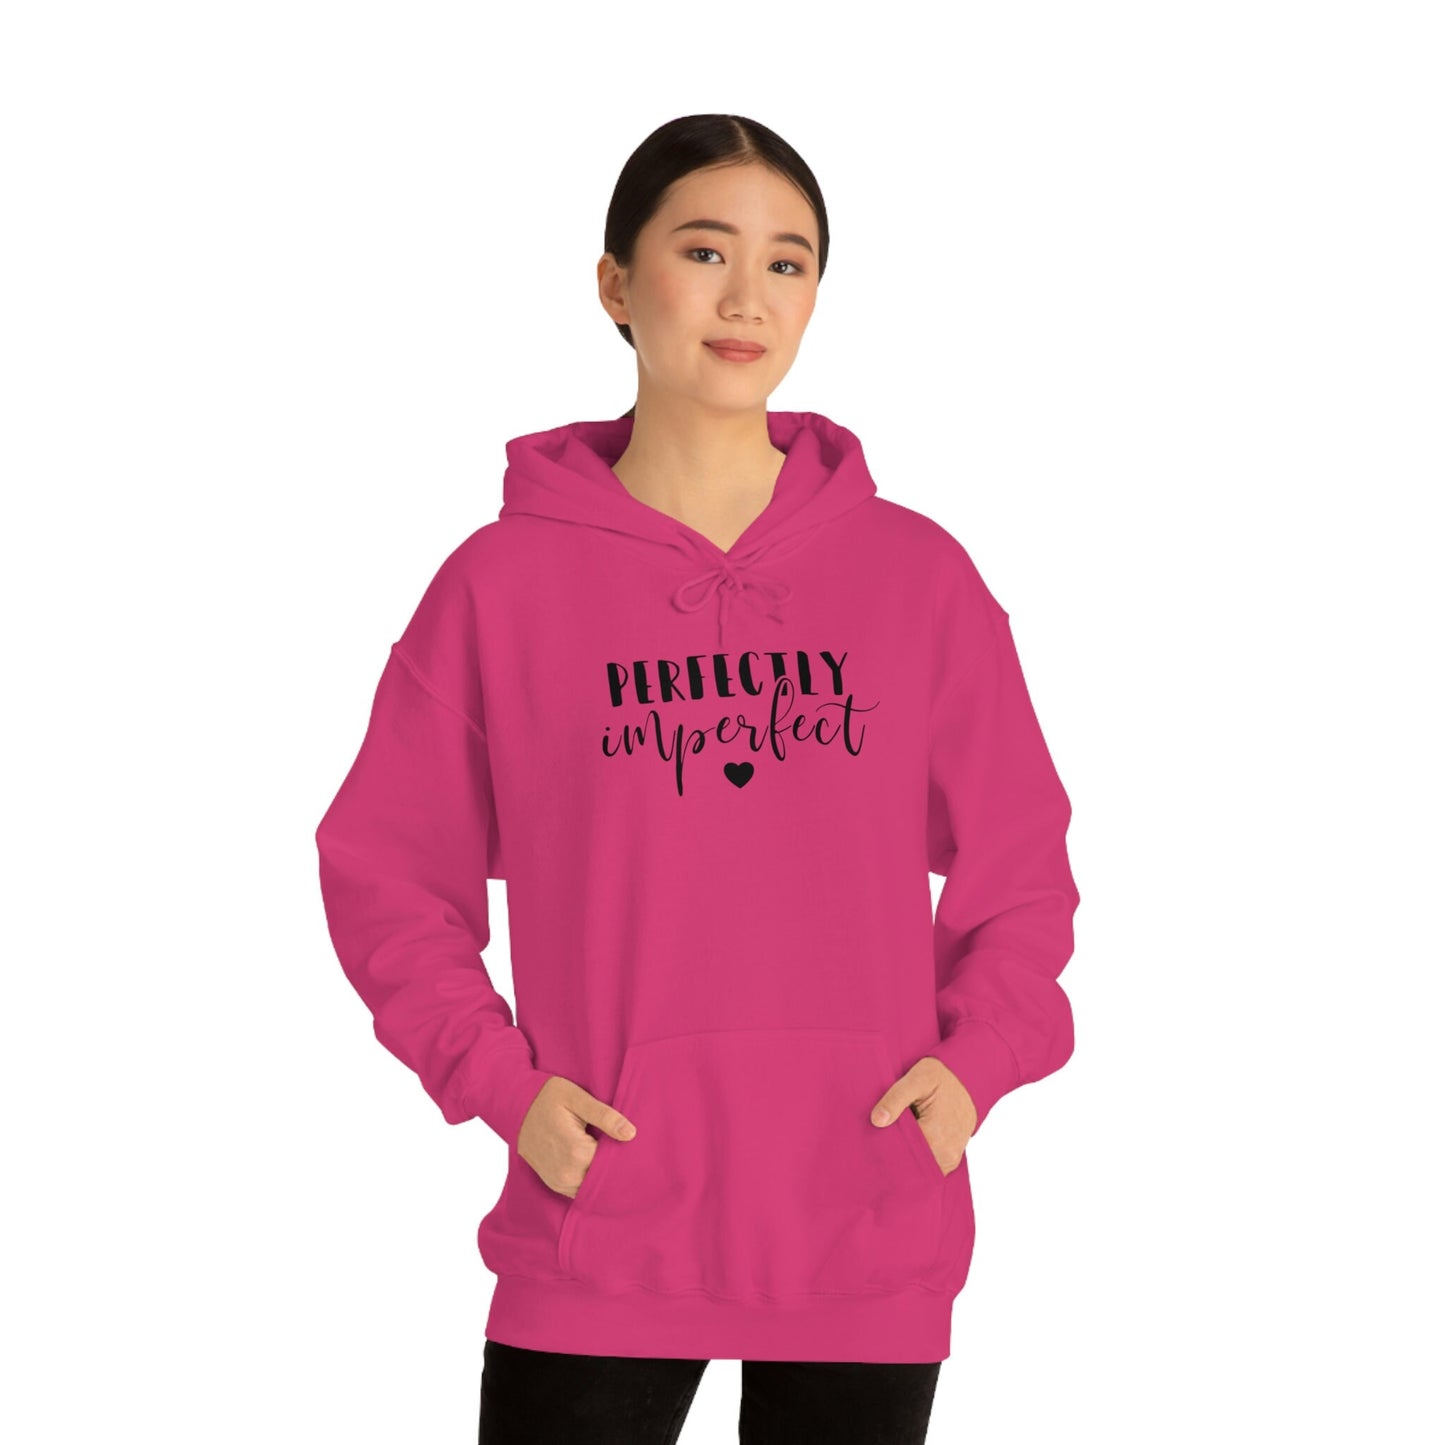 Unisex Heavy Blend Hooded Sweatshirt - Perfectly Imperfect